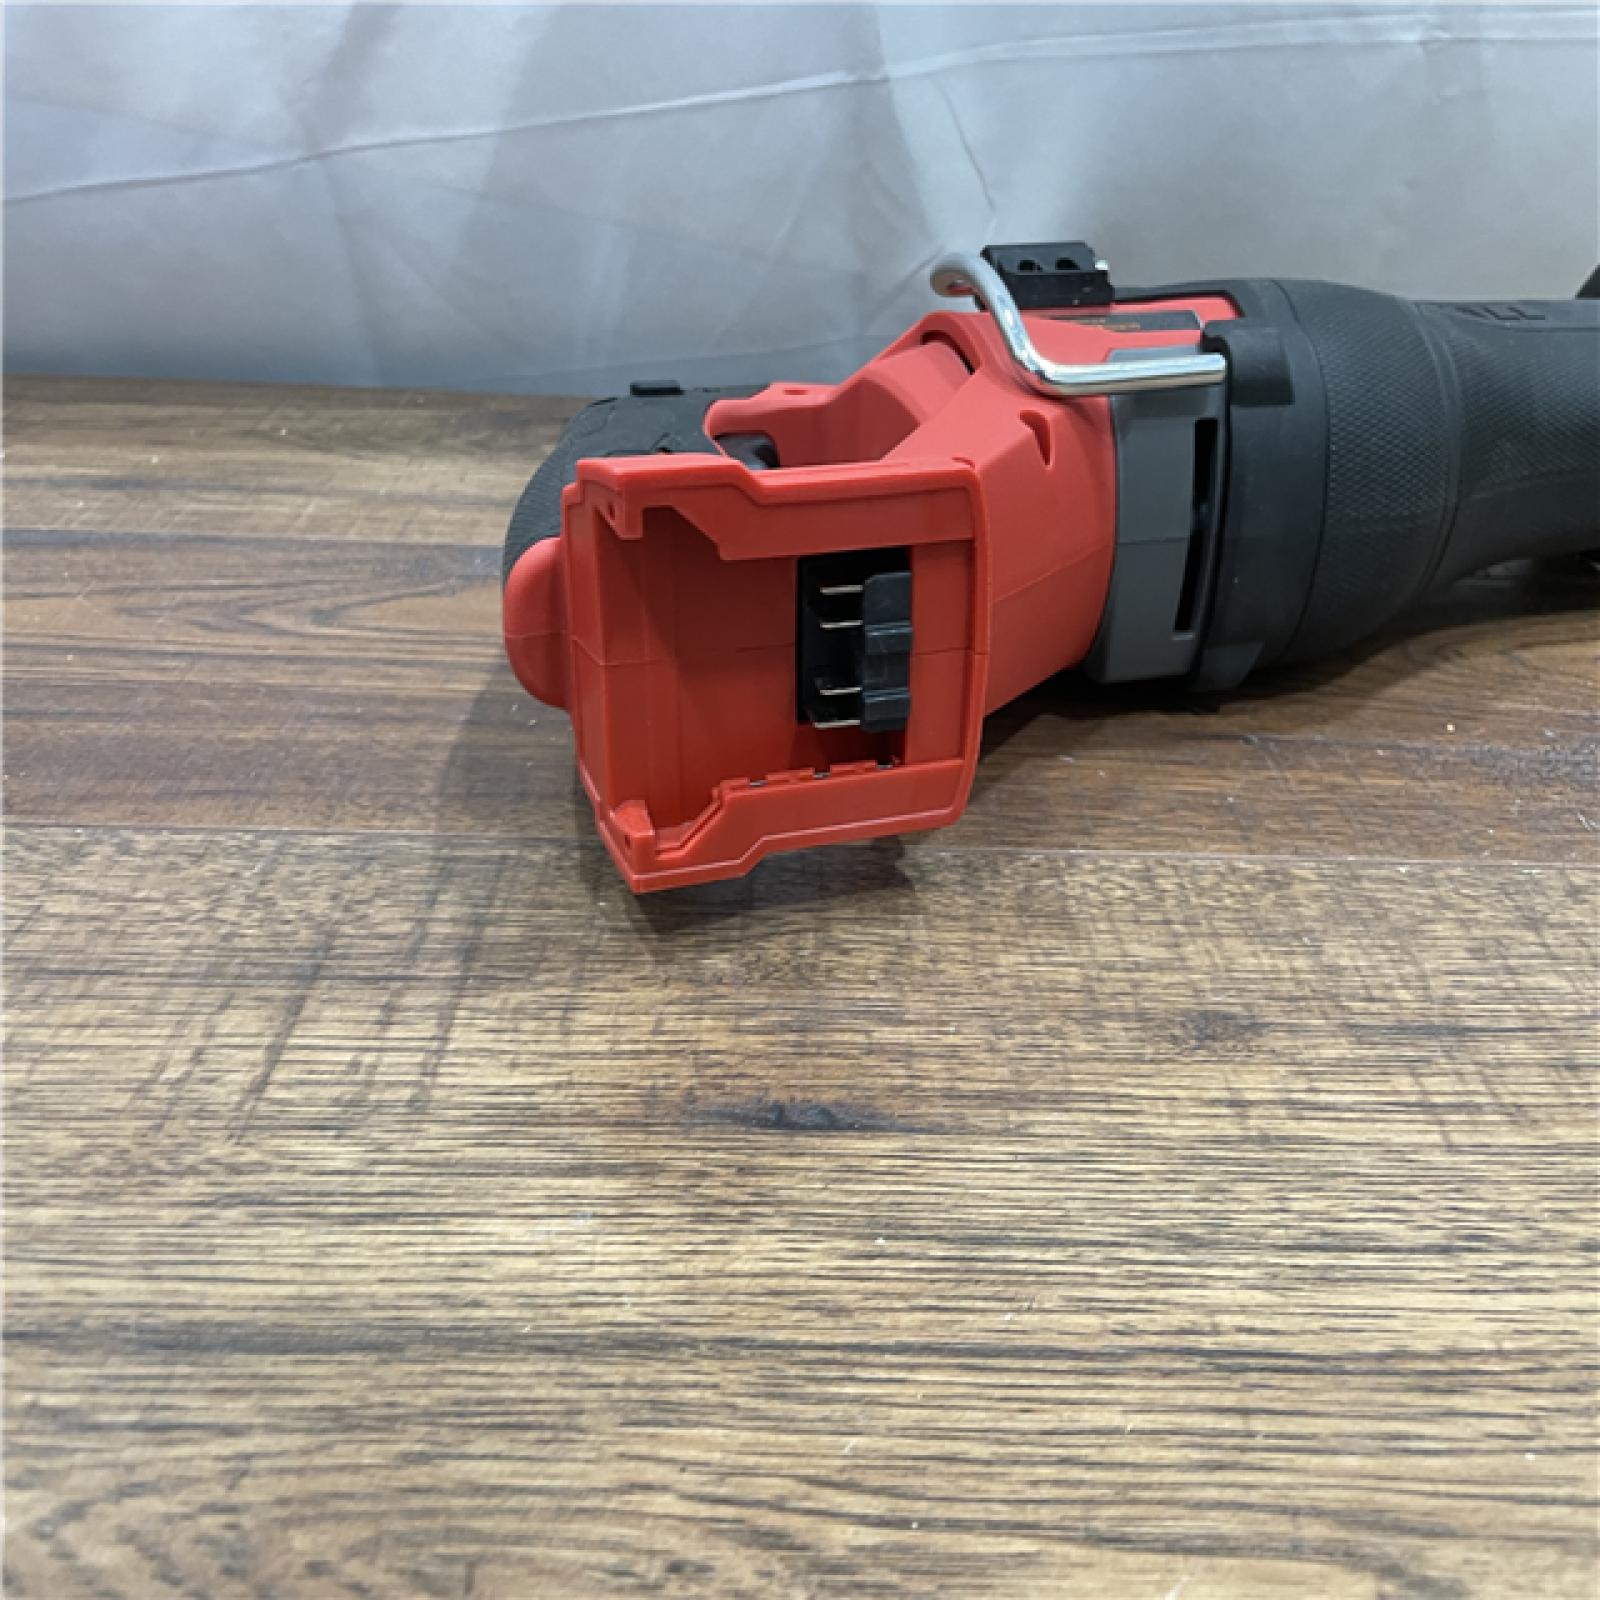 AS-IS Milwaukee M18 FUEL 18-V Lithium-Ion Brushless Cordless Sawzall Reciprocating Saw Kit with (1) FORGE 6.0Ah Battery